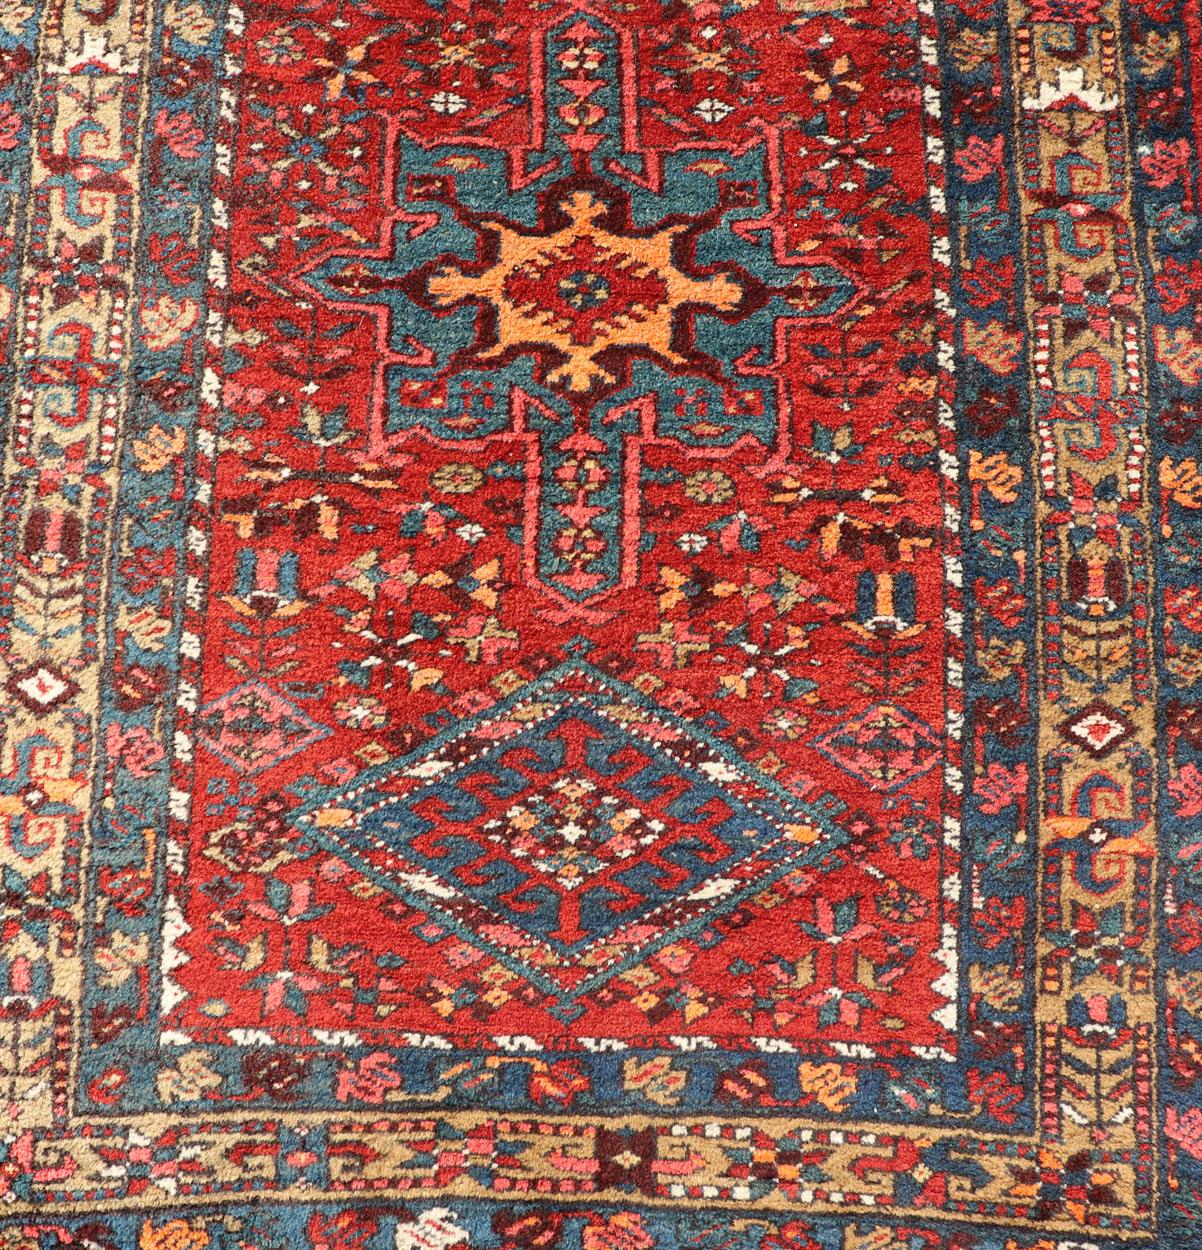 Very Long antique Persian Heriz runner with geometric medallion design in red, blue and colorful tones, rug PTA-21002 , country of origin / type: Iran / Heriz, circa 1920

Measures: 3'2 x 18'.